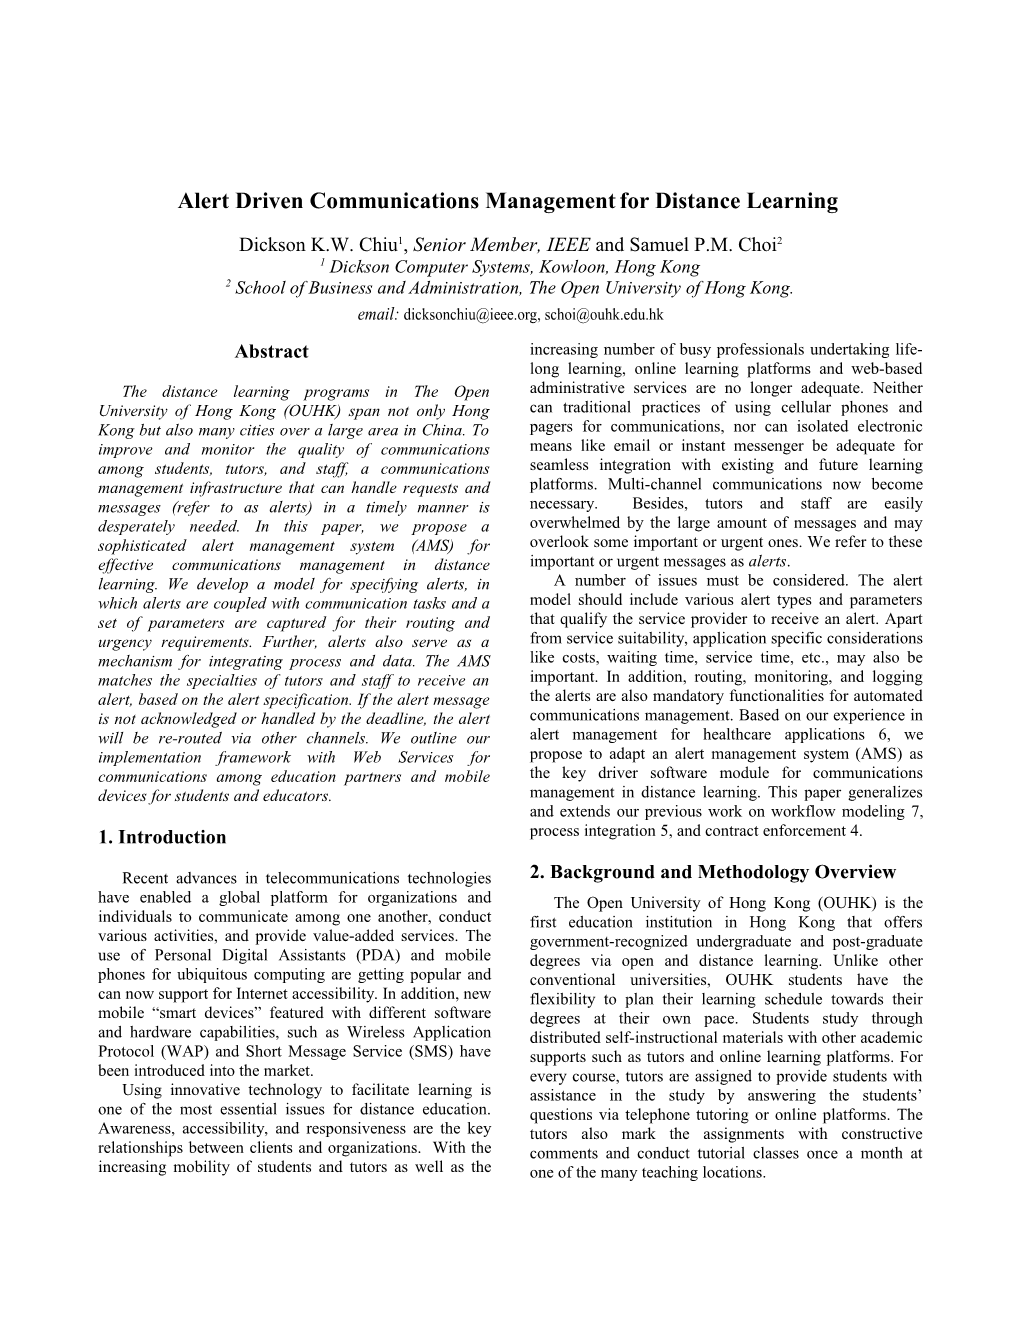 A Lert Driven Communications Management for Distance Learning